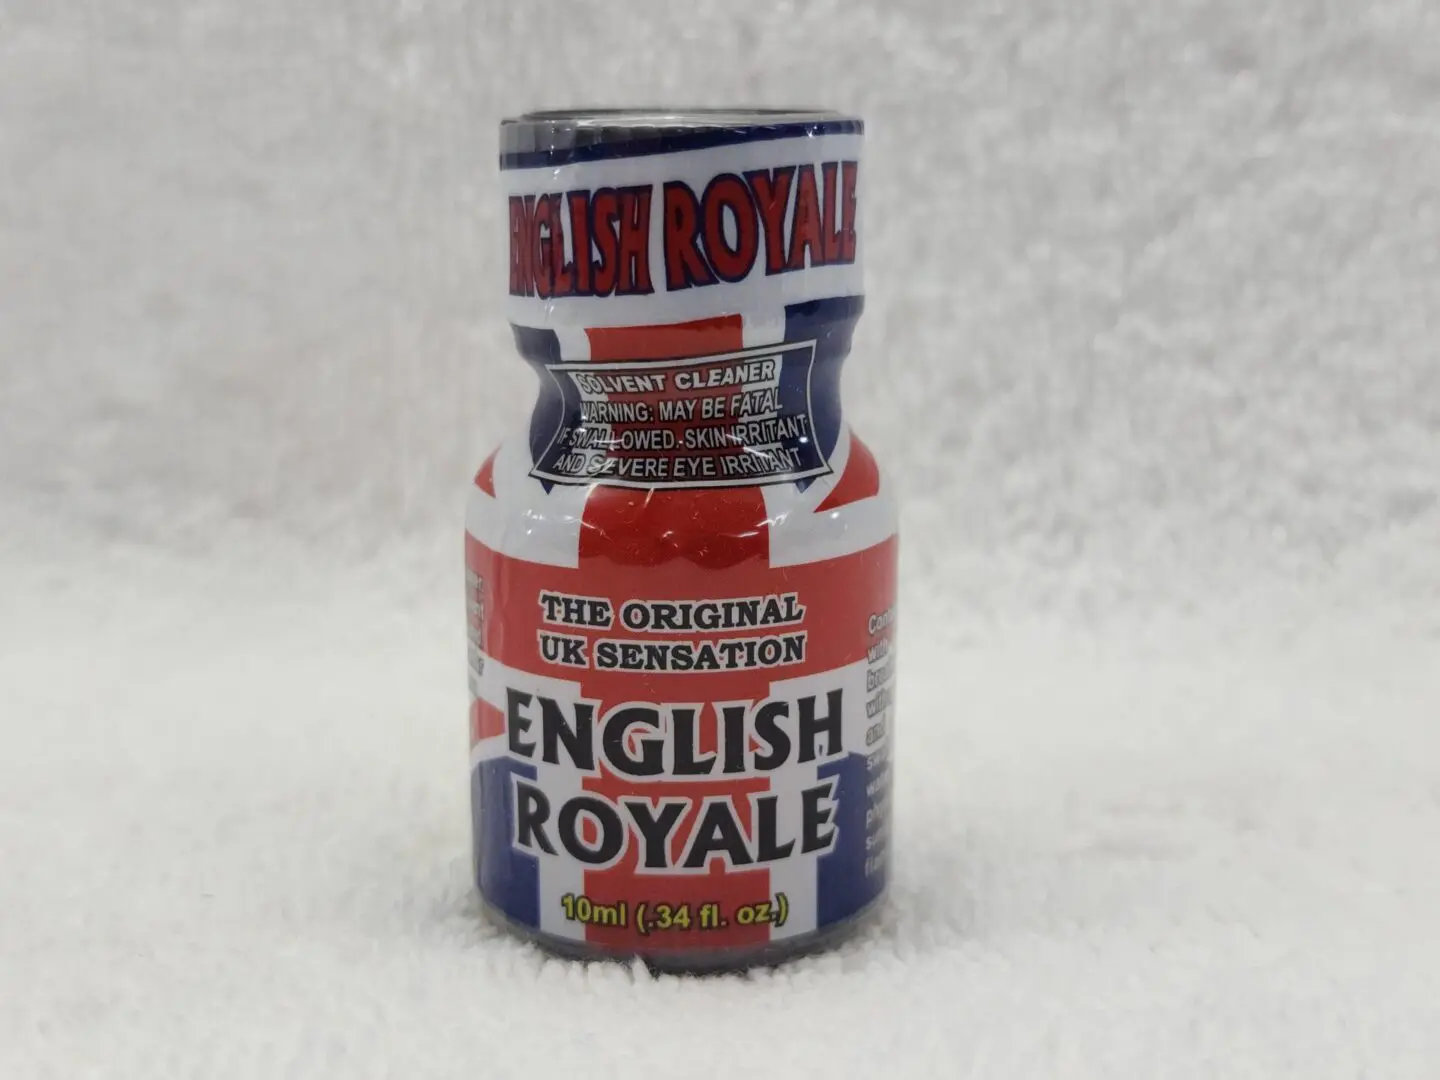 A bottle of English Royal with the British flag on it.